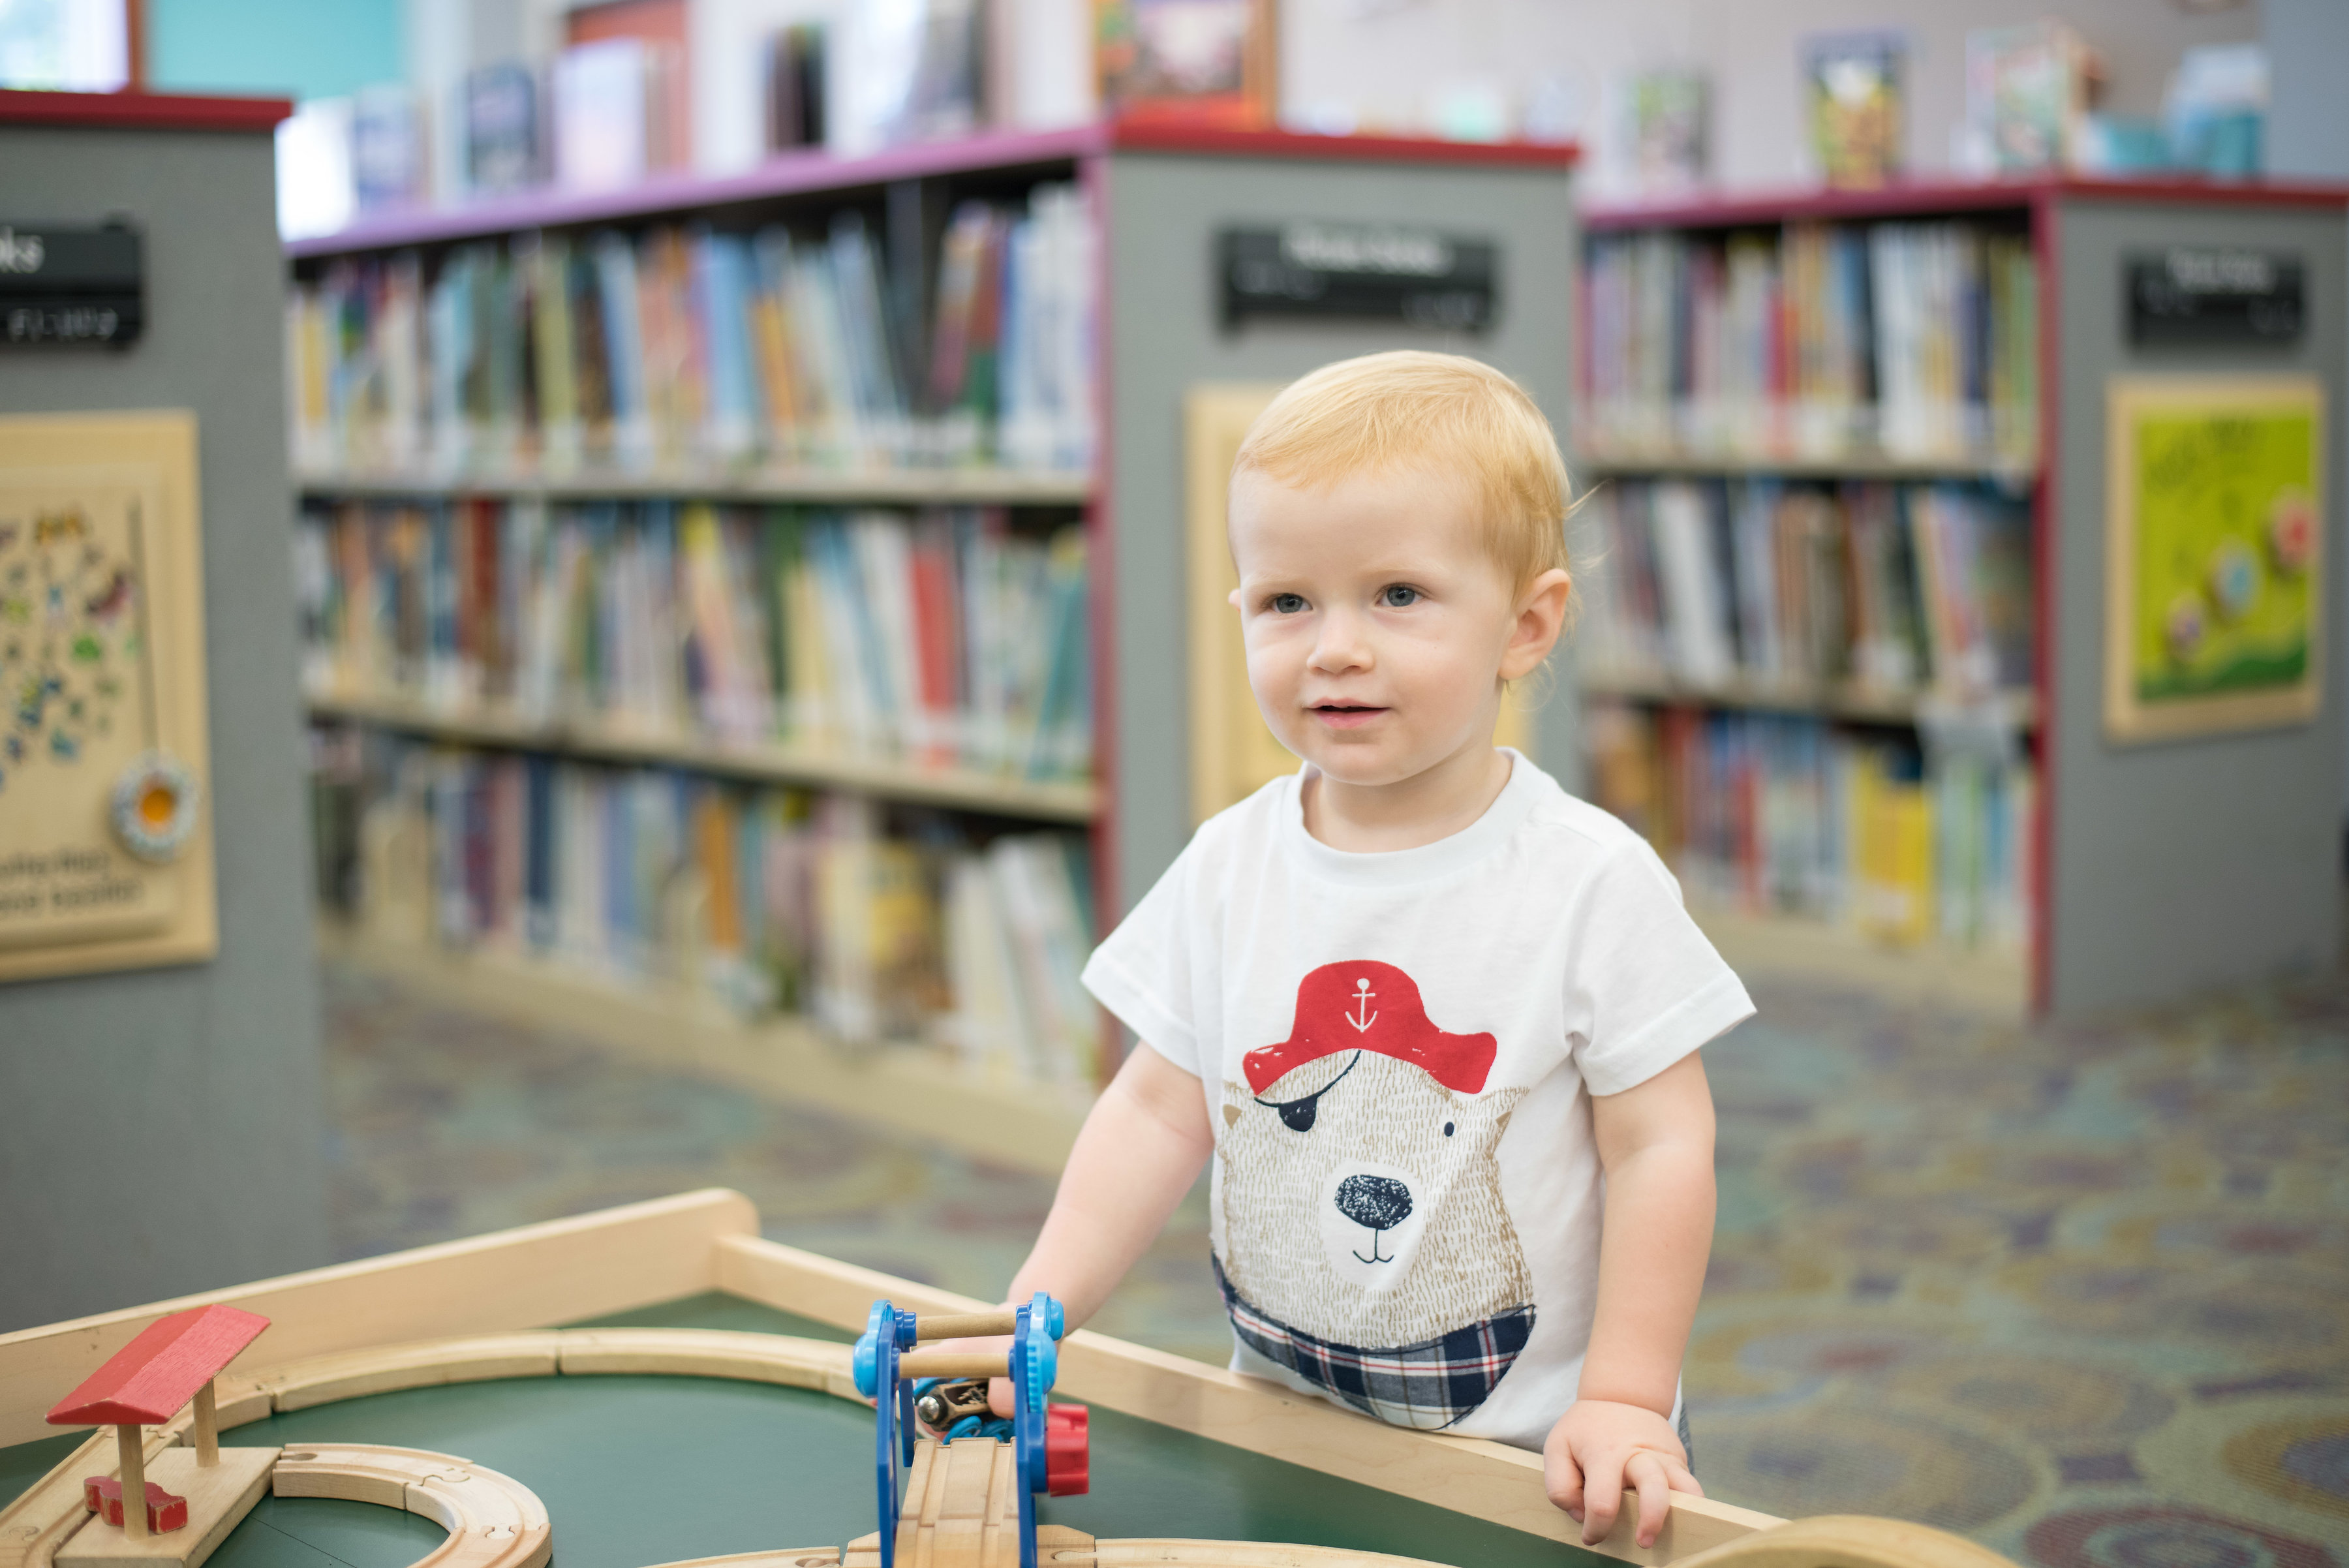 Preschool Zone (ages 3-5) at Main Library